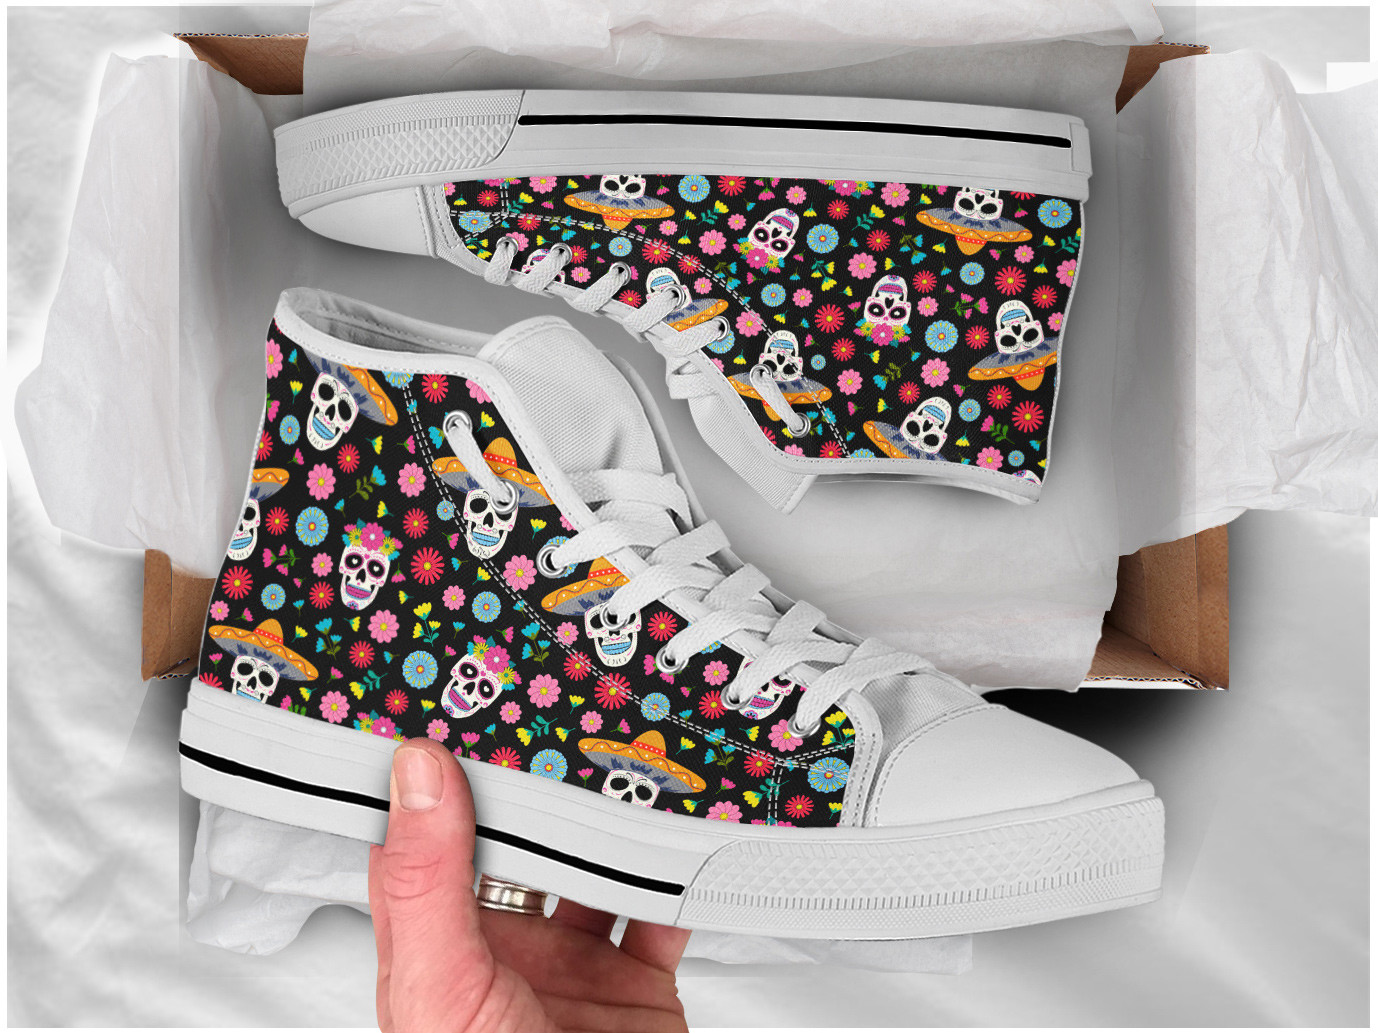 Mexican Skull Shoes | Custom High Top Sneakers For Kids & Adults